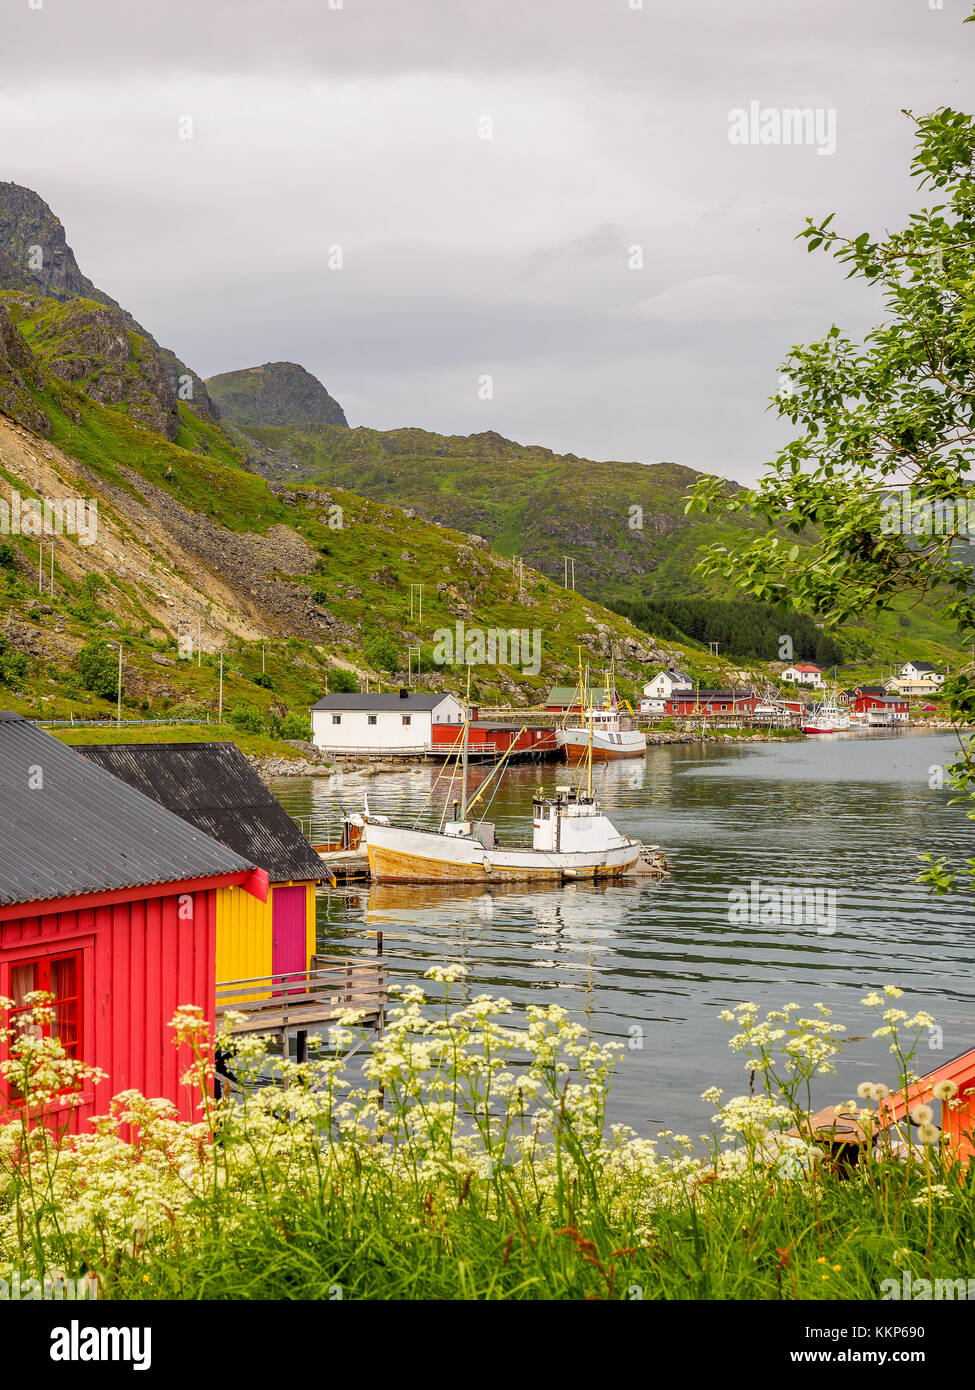 Fishermans huts in Ballstad, Lofoten Islands, Norway.  The fisher houses on stilts are called rorbur. Stock Photo